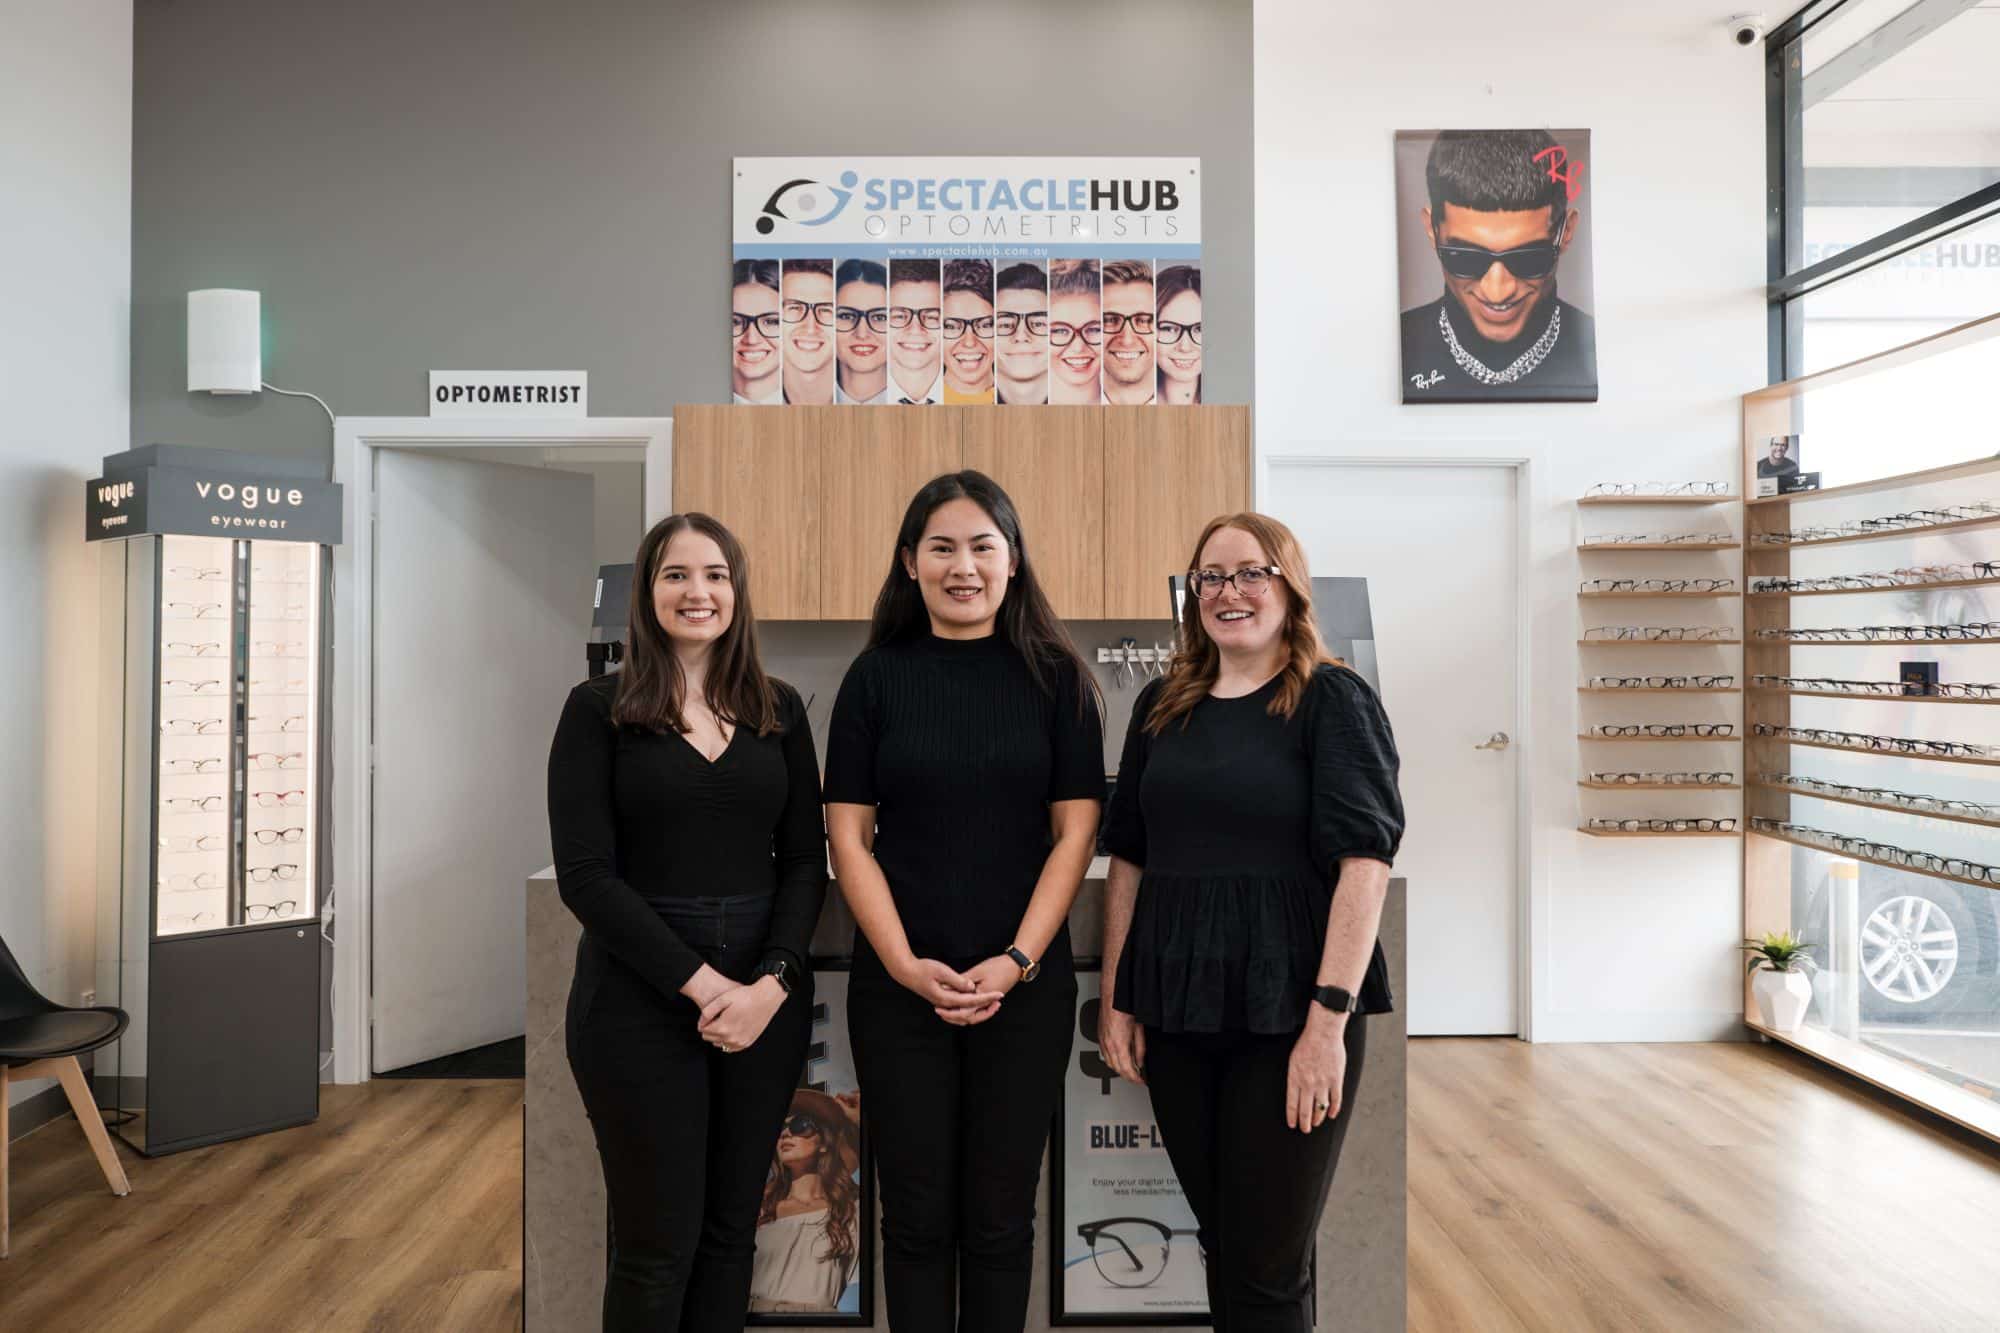 Spectacle Hub Optometrists Curelwis - Meet The Team